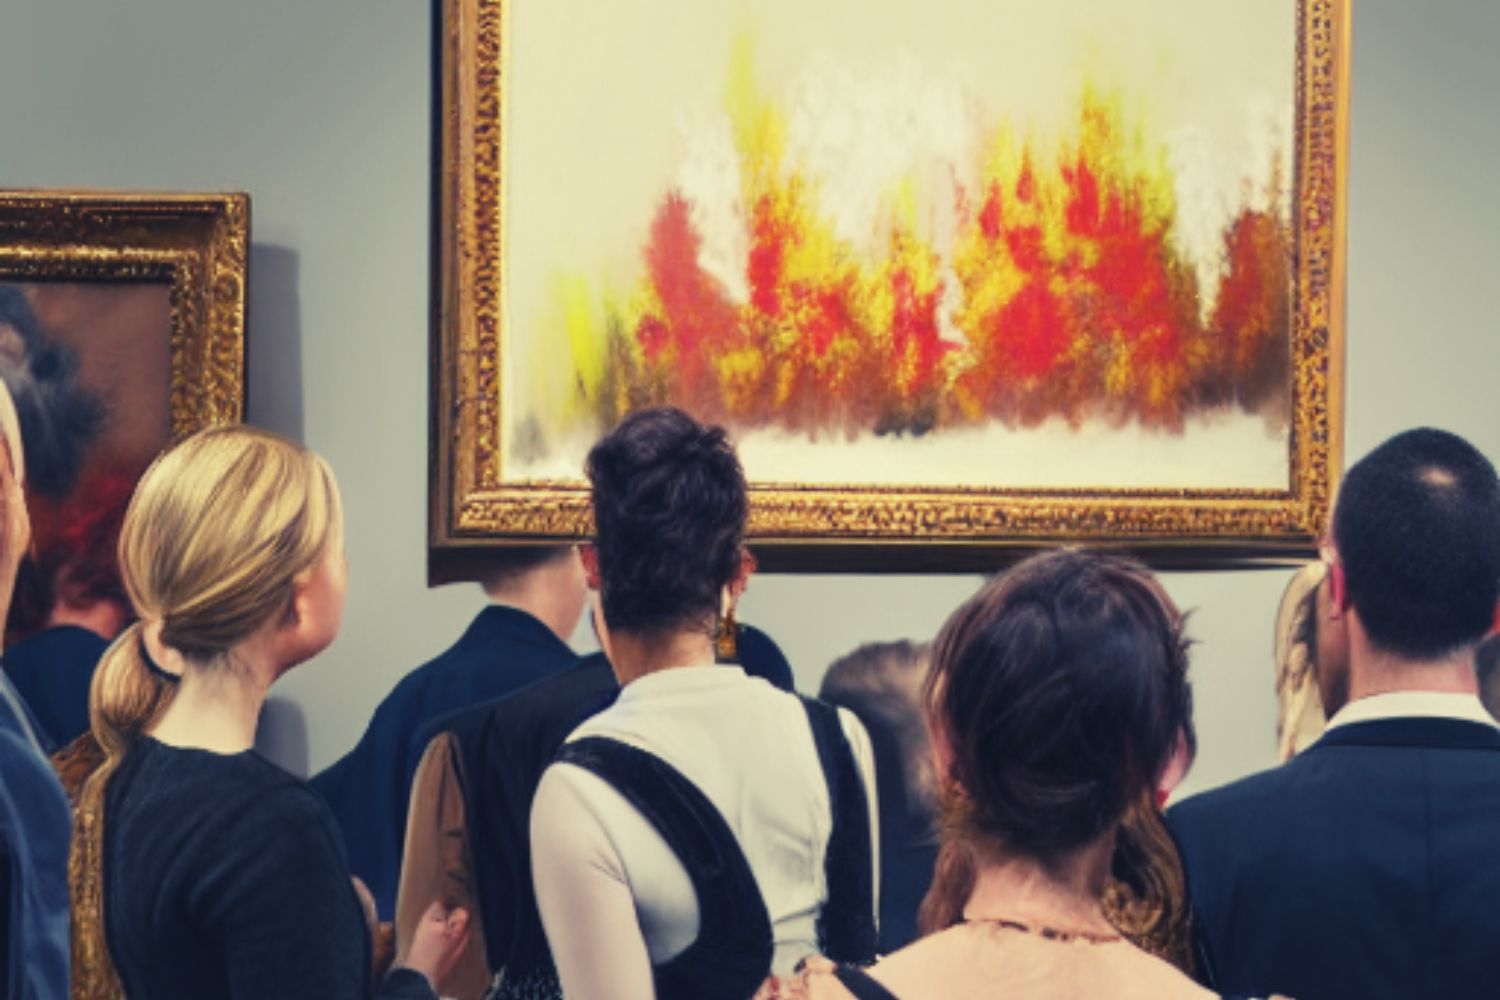 Group of Elite from Society are watching a painting at Art Gallery on the Wall